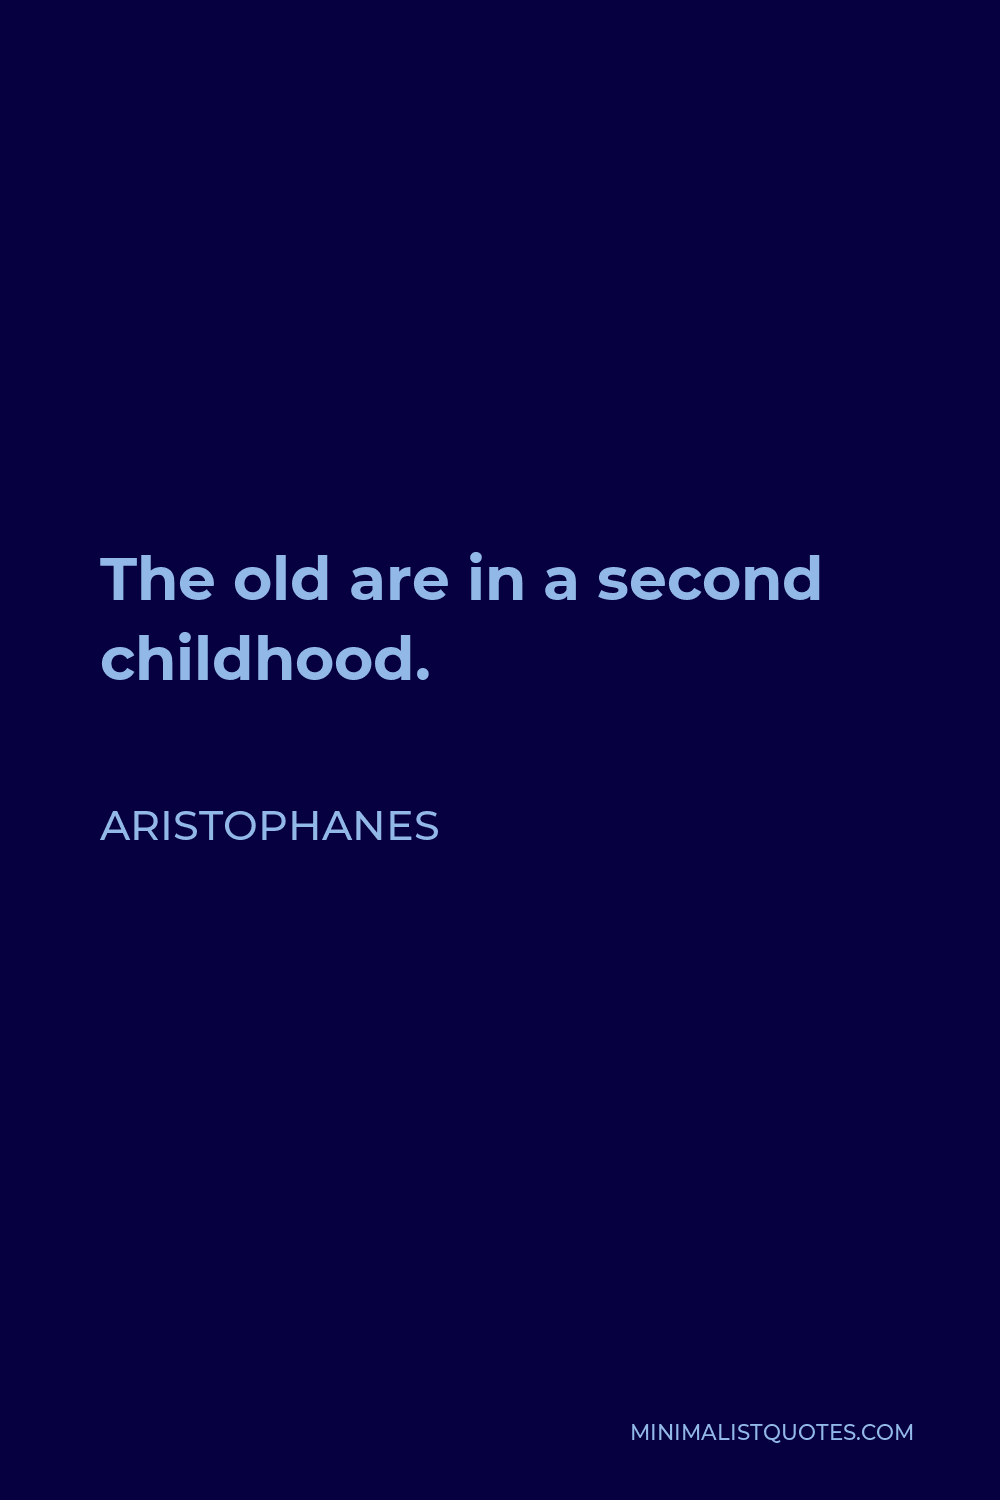 Aristophanes Quote - The old are in a second childhood.